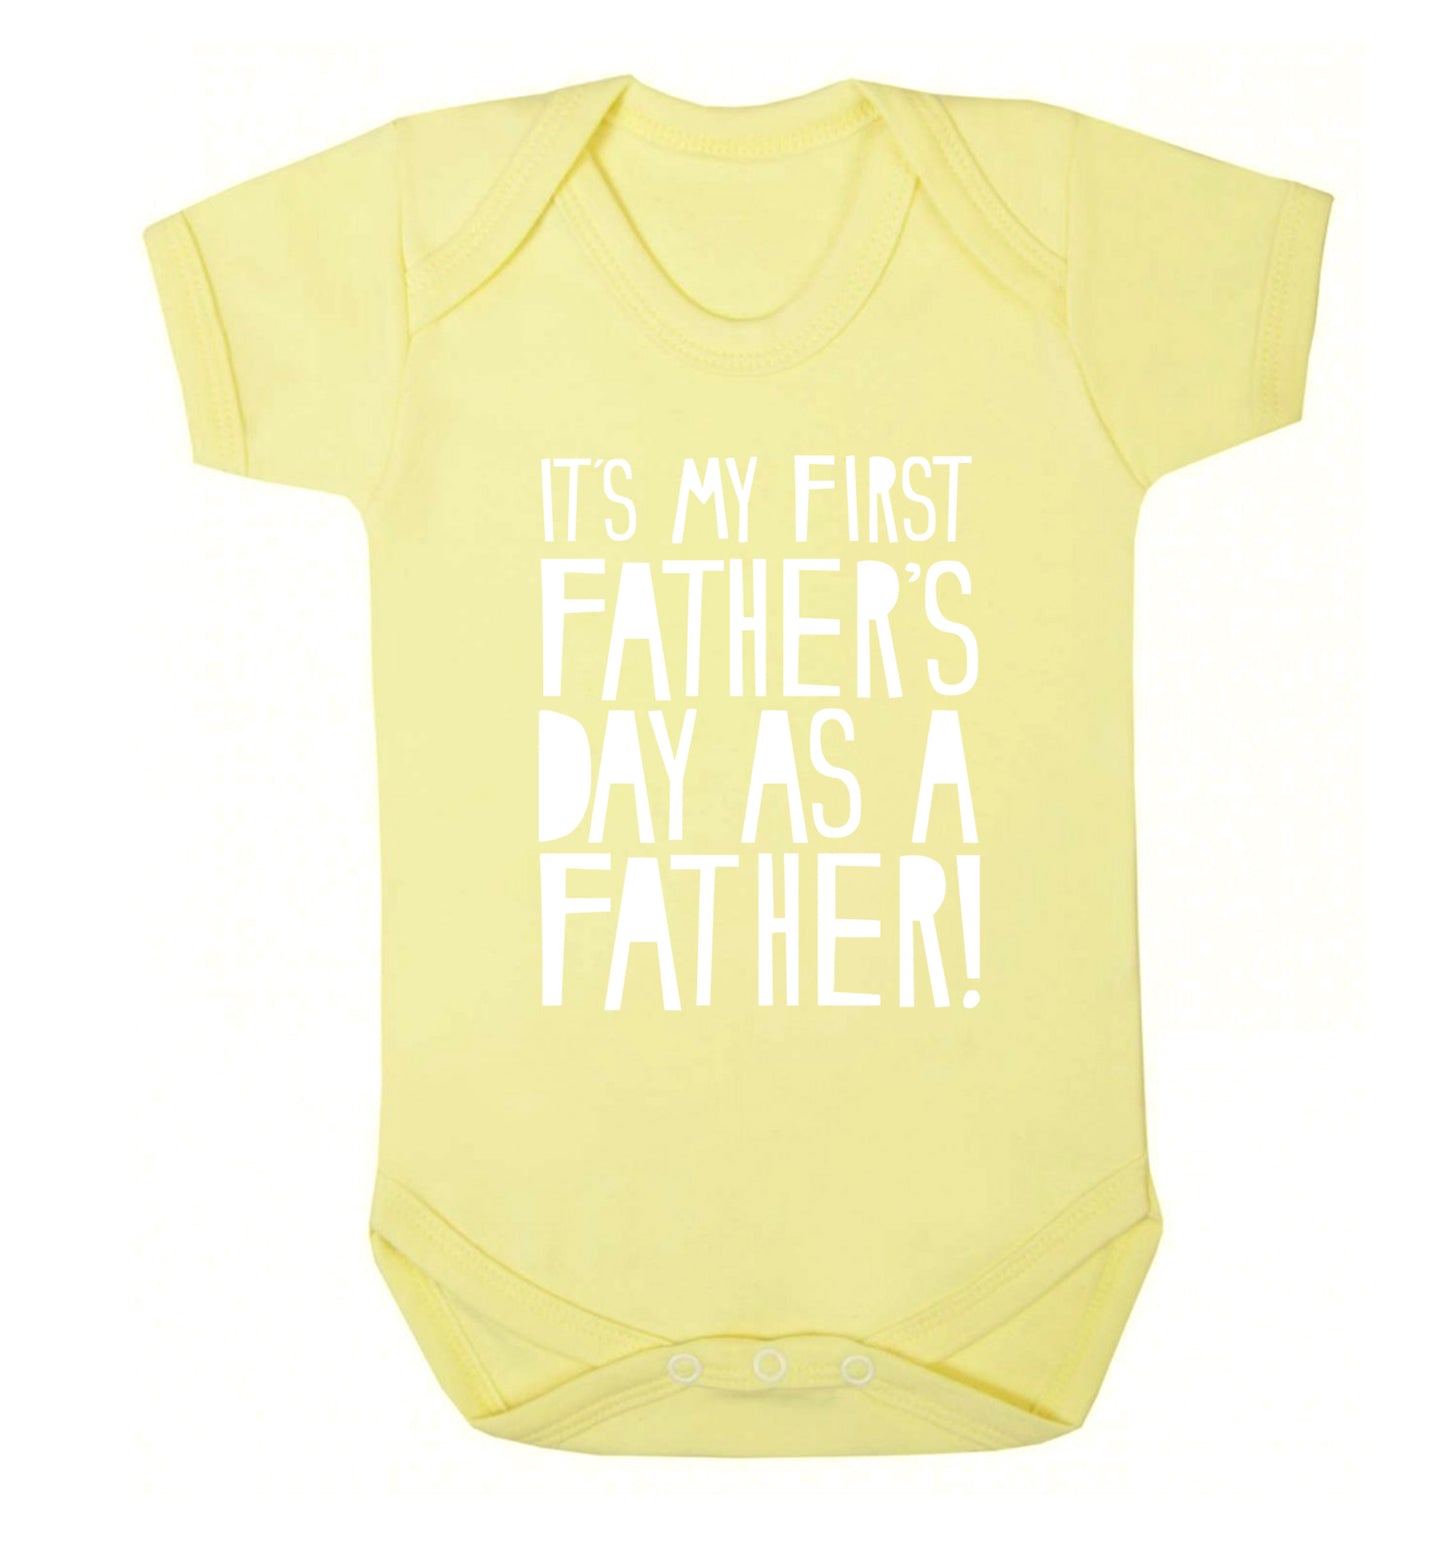 It's my first Father's Day as a father! Baby Vest pale yellow 18-24 months